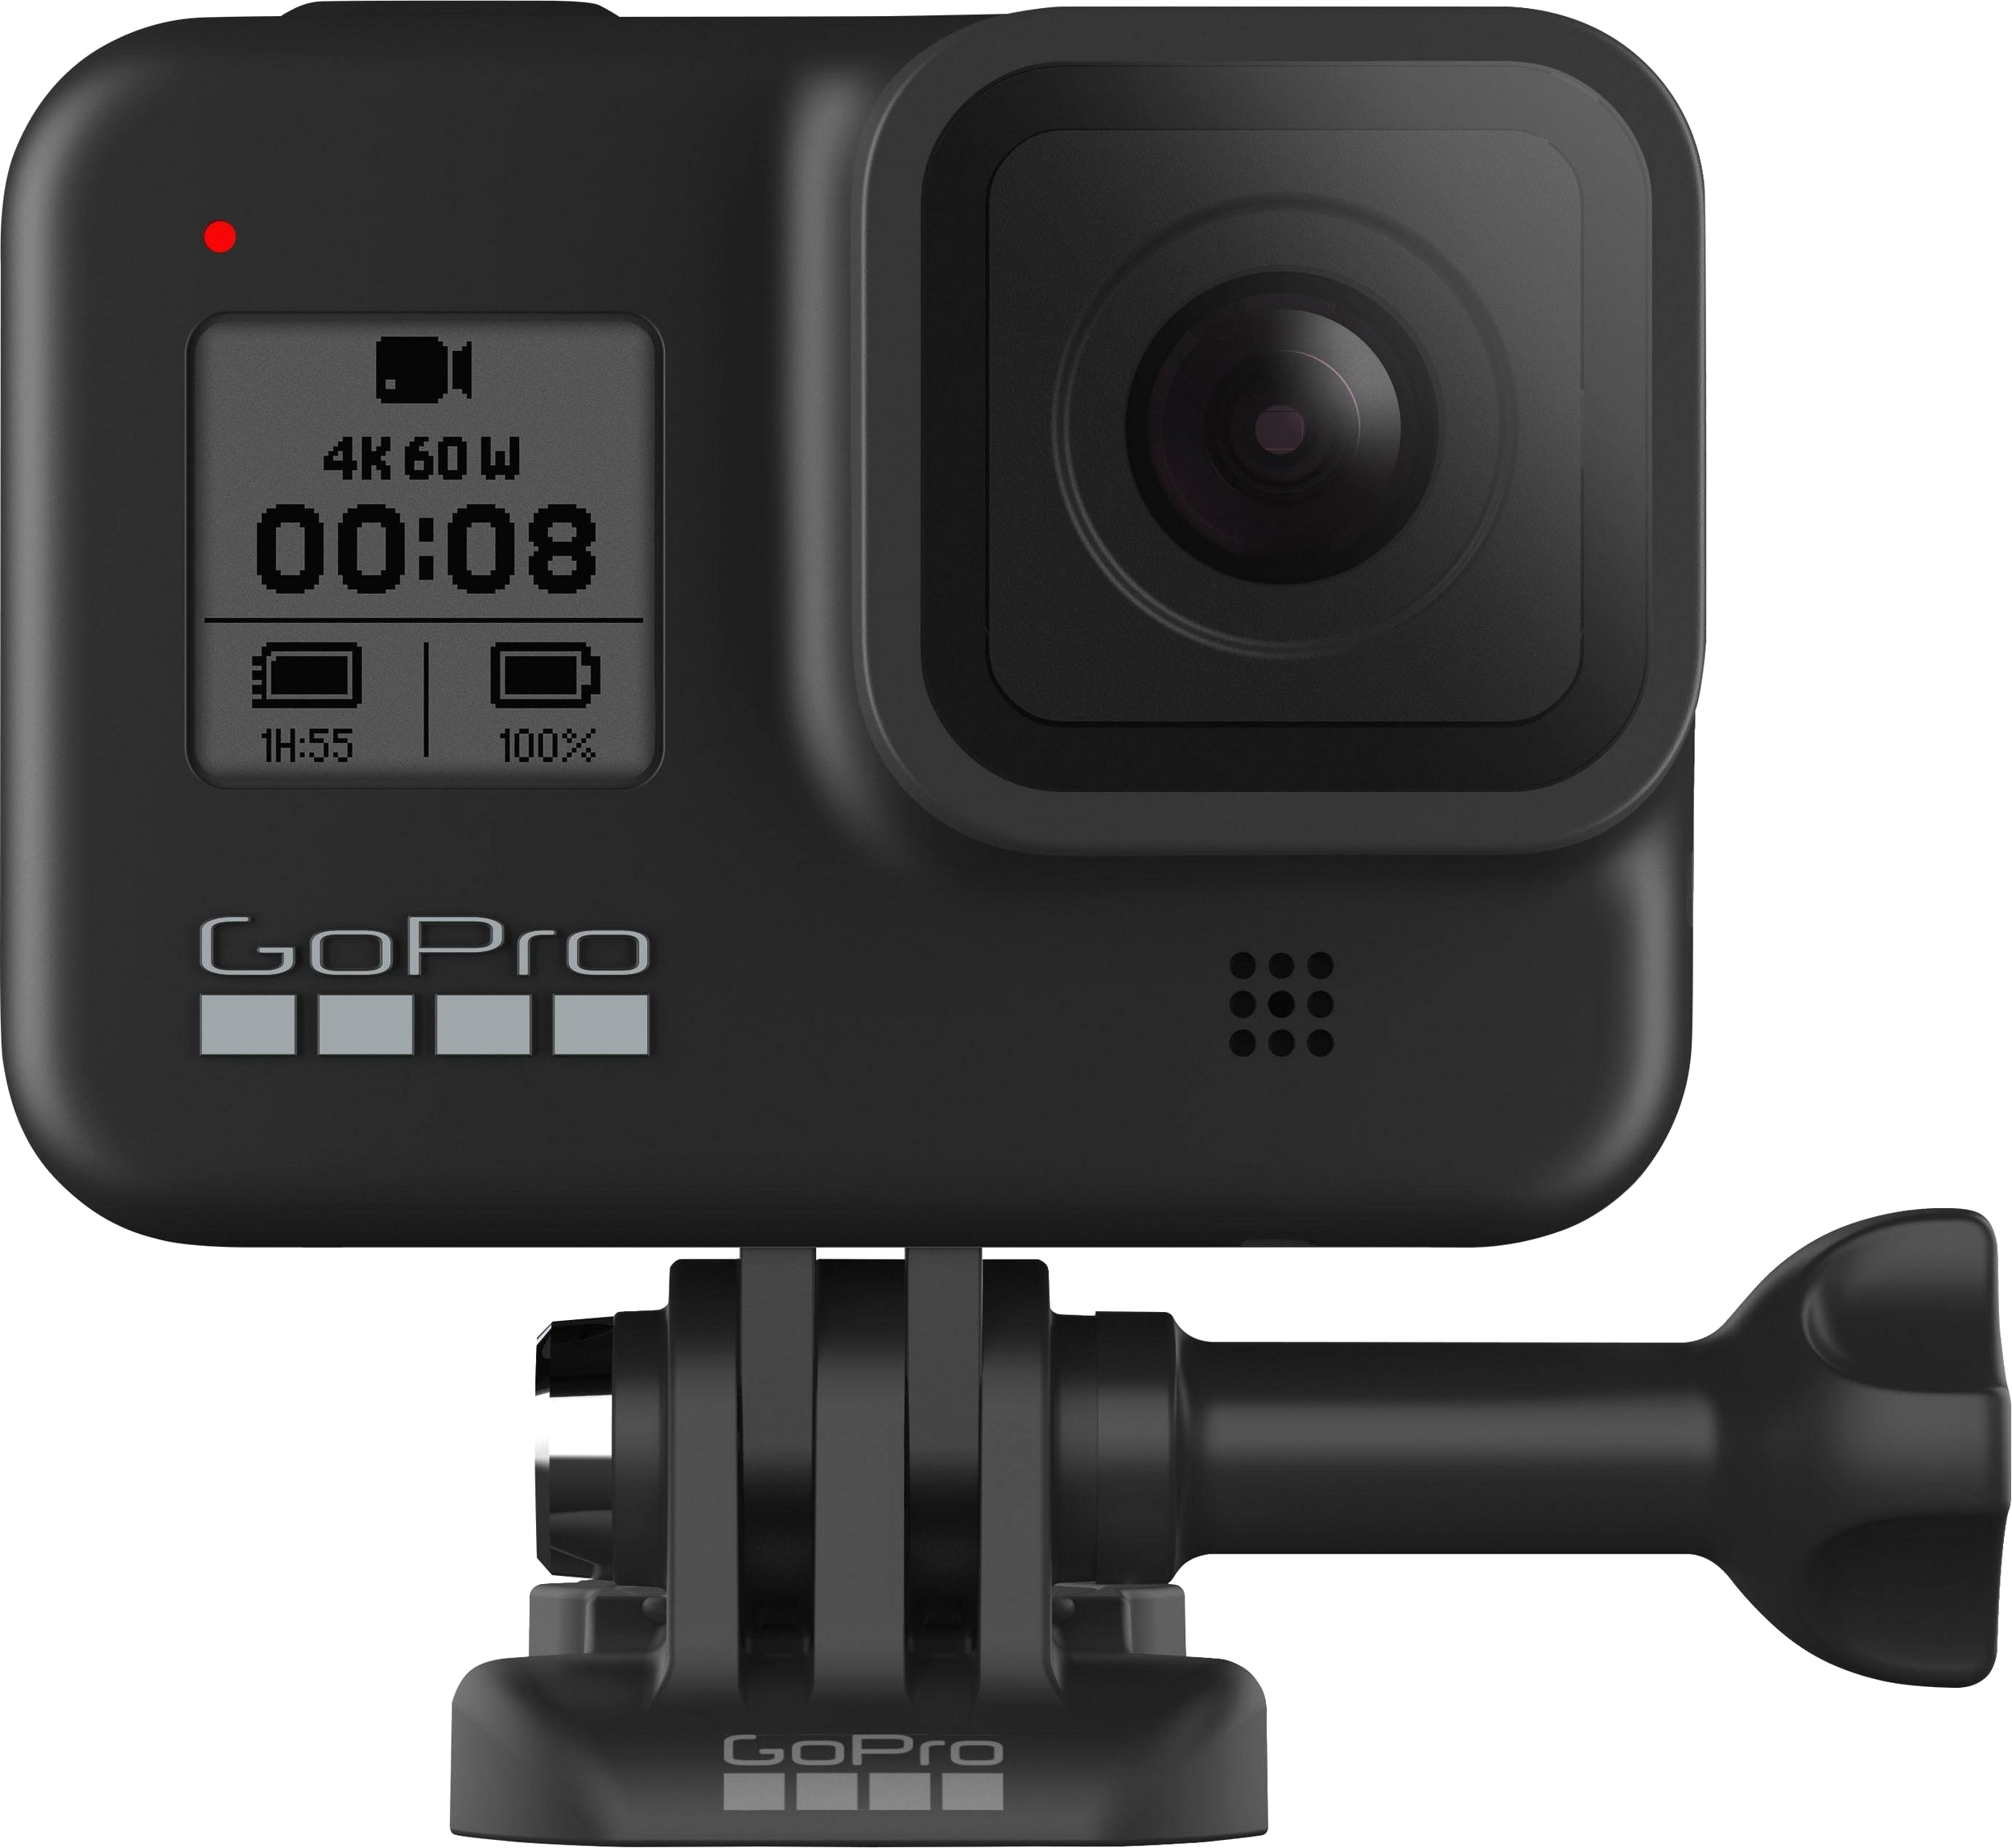 Rent GoPro HERO8 Action Camera from €5.90 per month